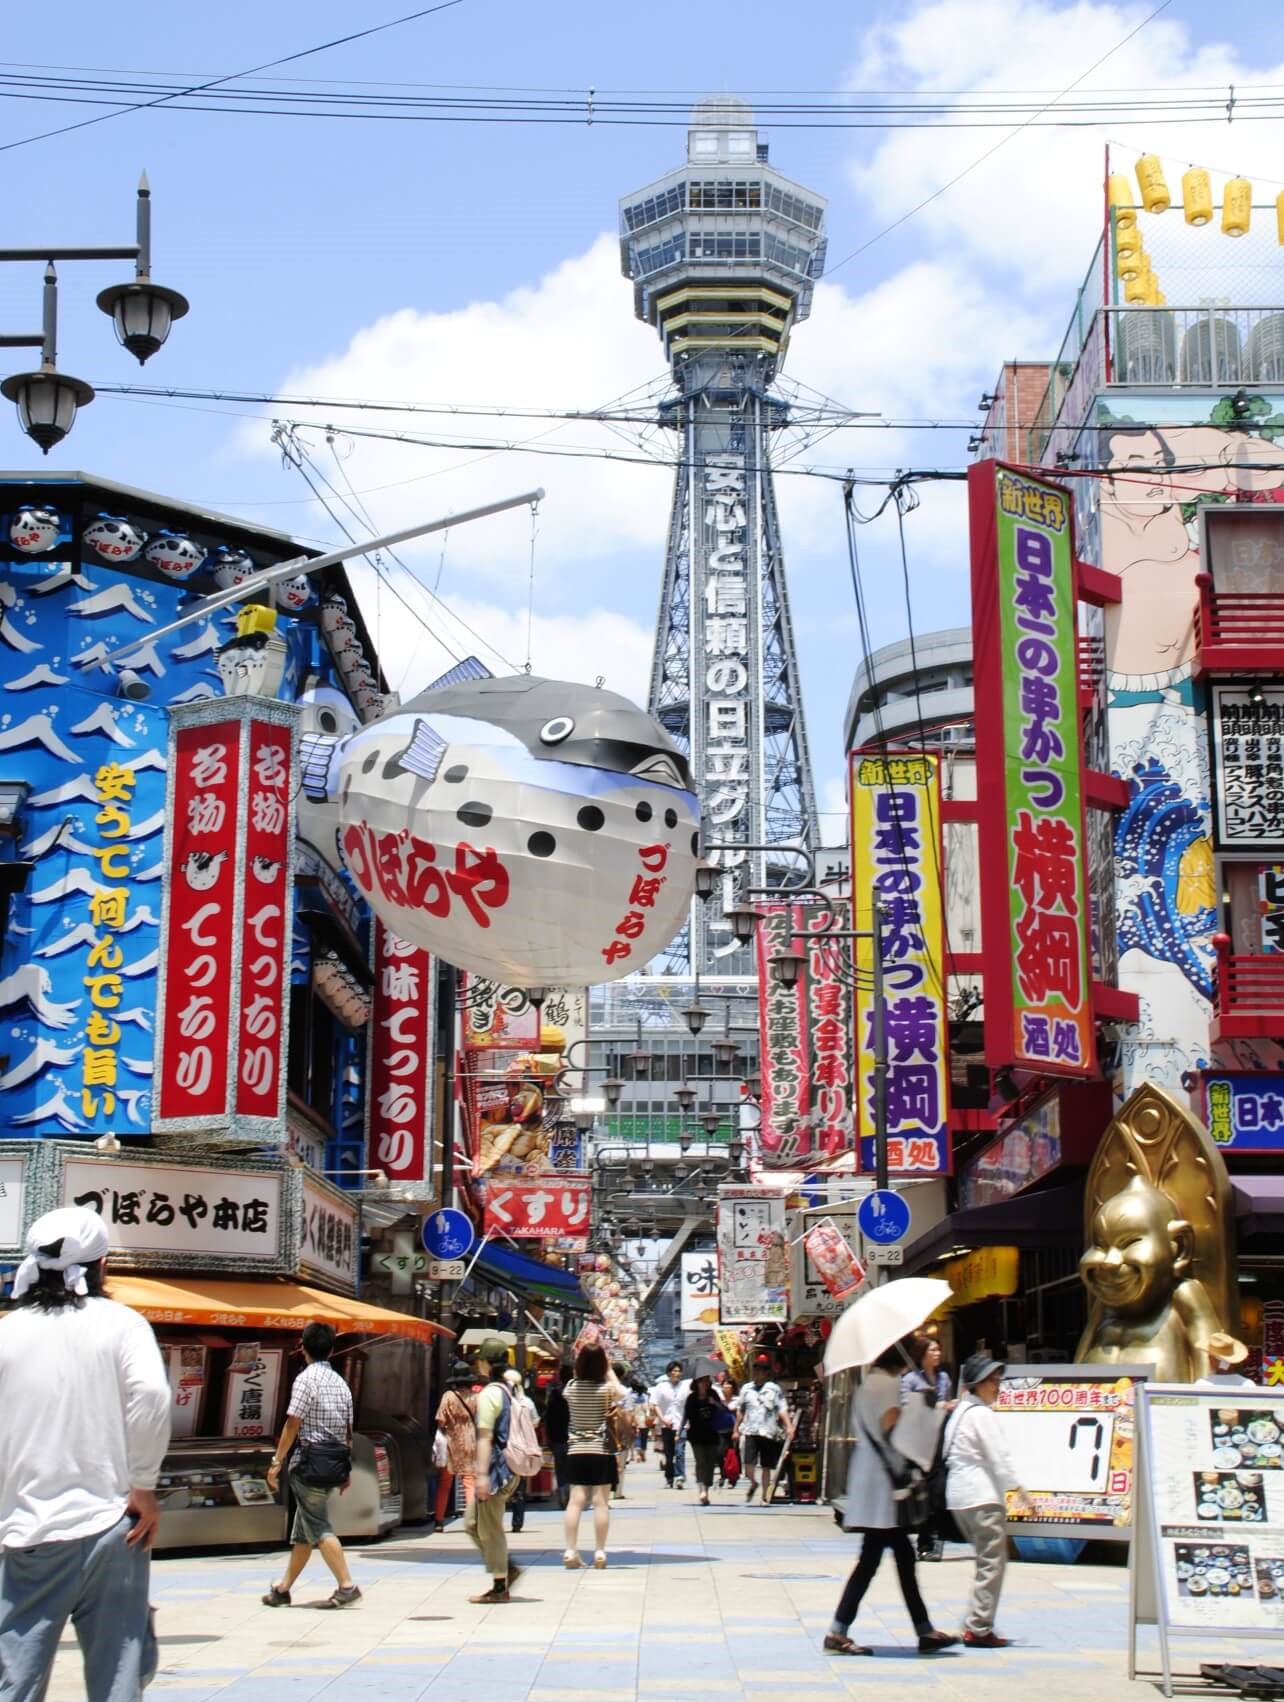 The street of Shinsekai district with colourful shop signs and Tsutenkaku Tower